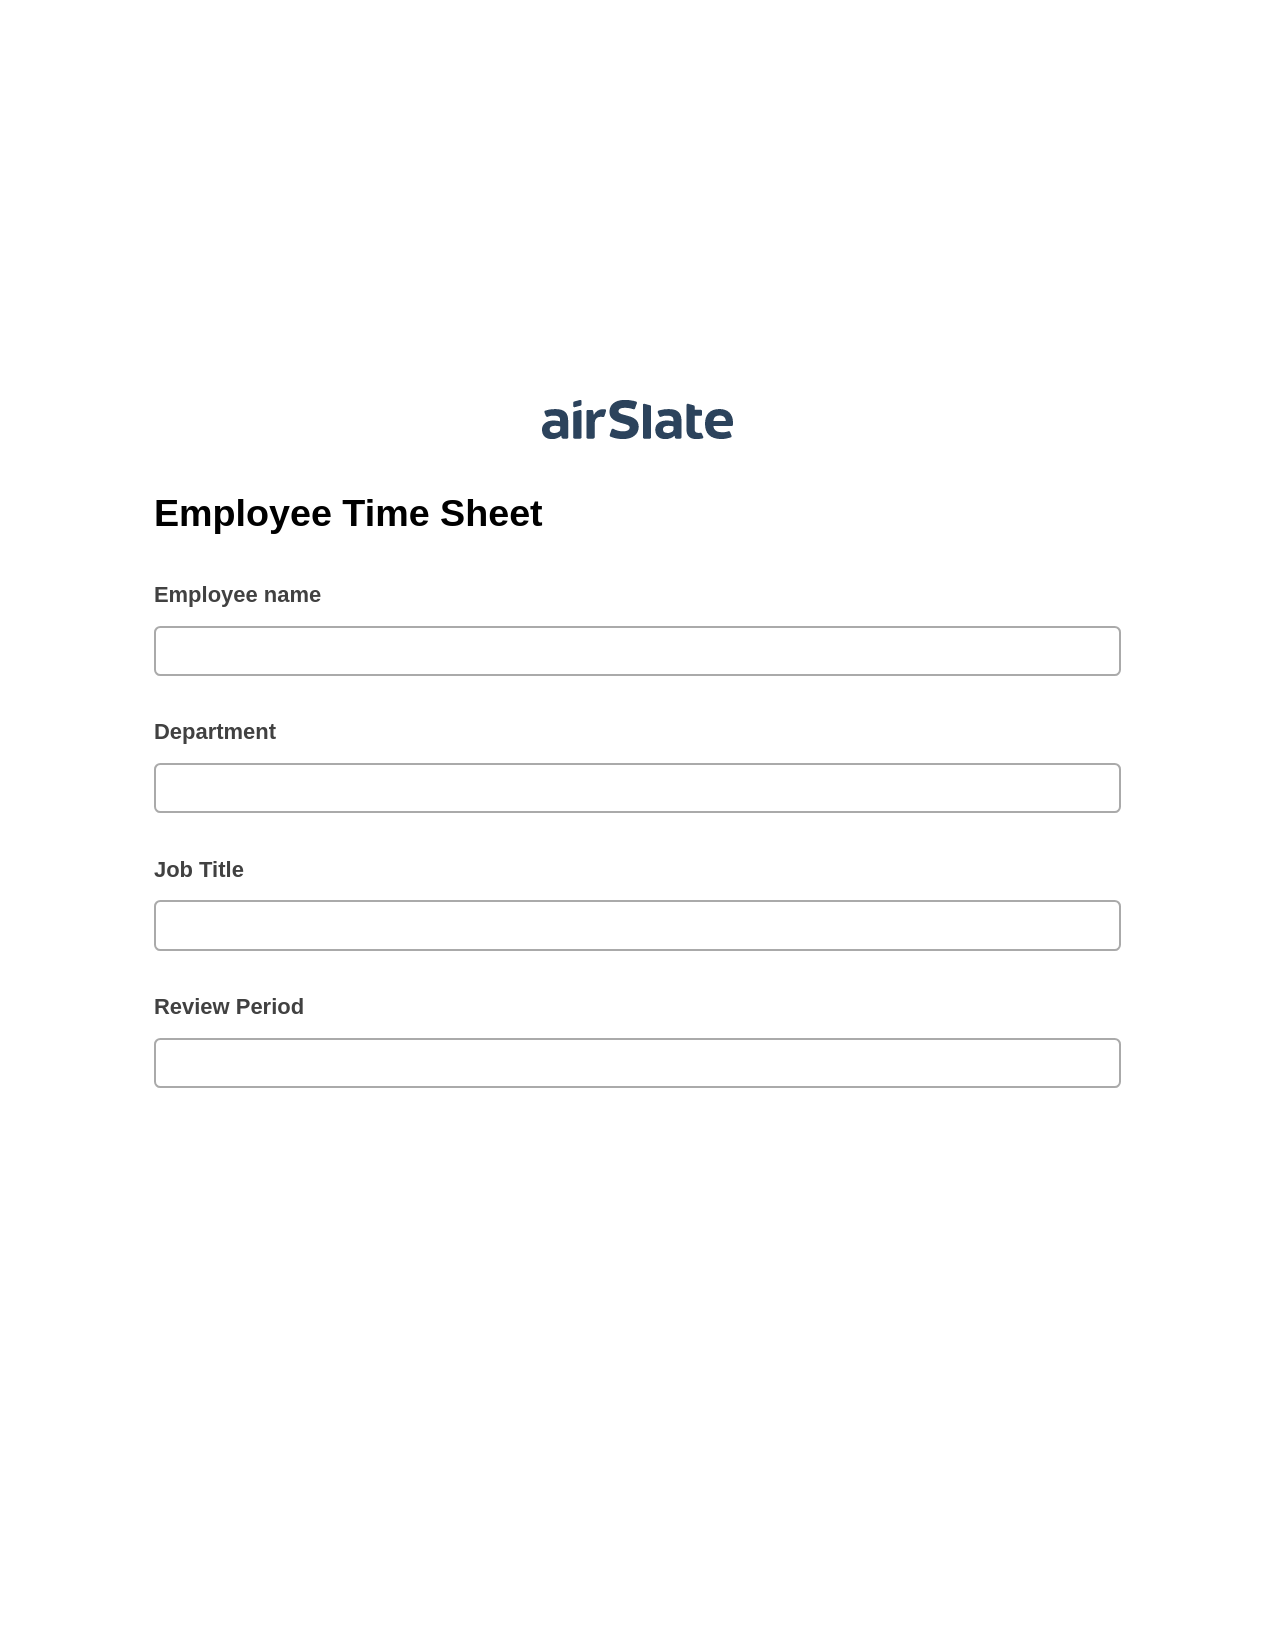 Employee Time Sheet Pre-fill from another Slate Bot, Remove Tags From Slate Bot, Archive to OneDrive Bot